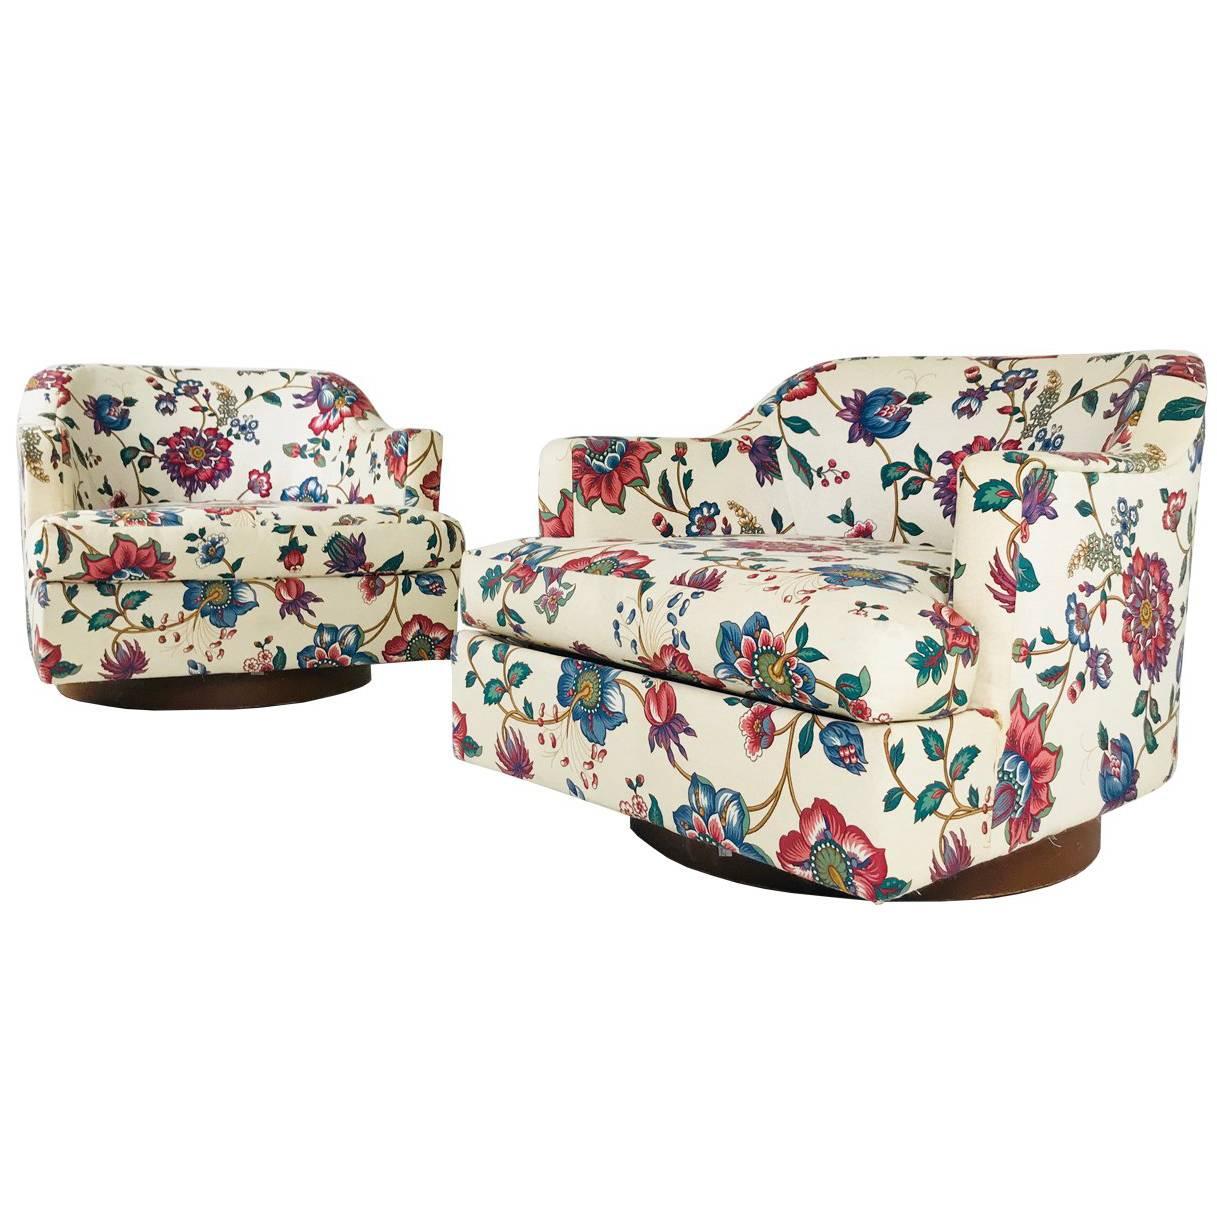 Pair of Floral Swivel Chairs in the Style of Milo Baughman.